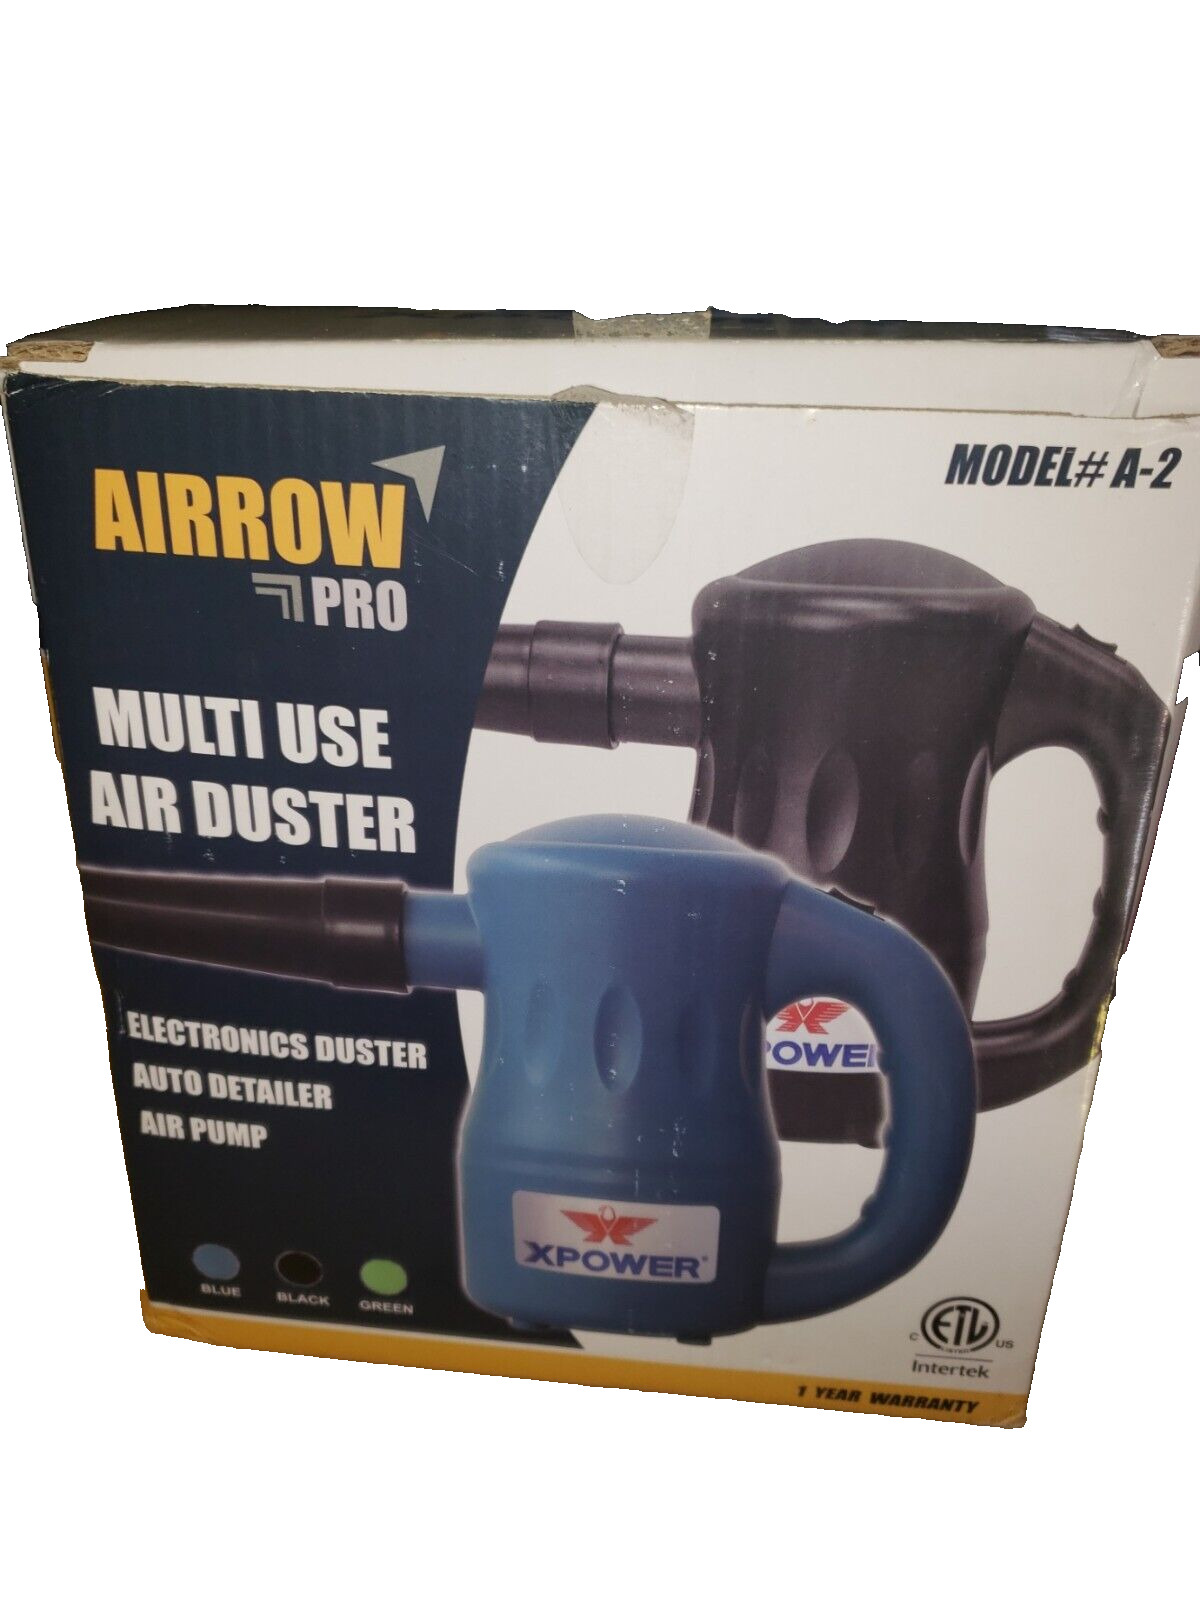 XPower Airrow Pro Multipurpose Powered Duster Air Pump Model A-2 (TESTED)